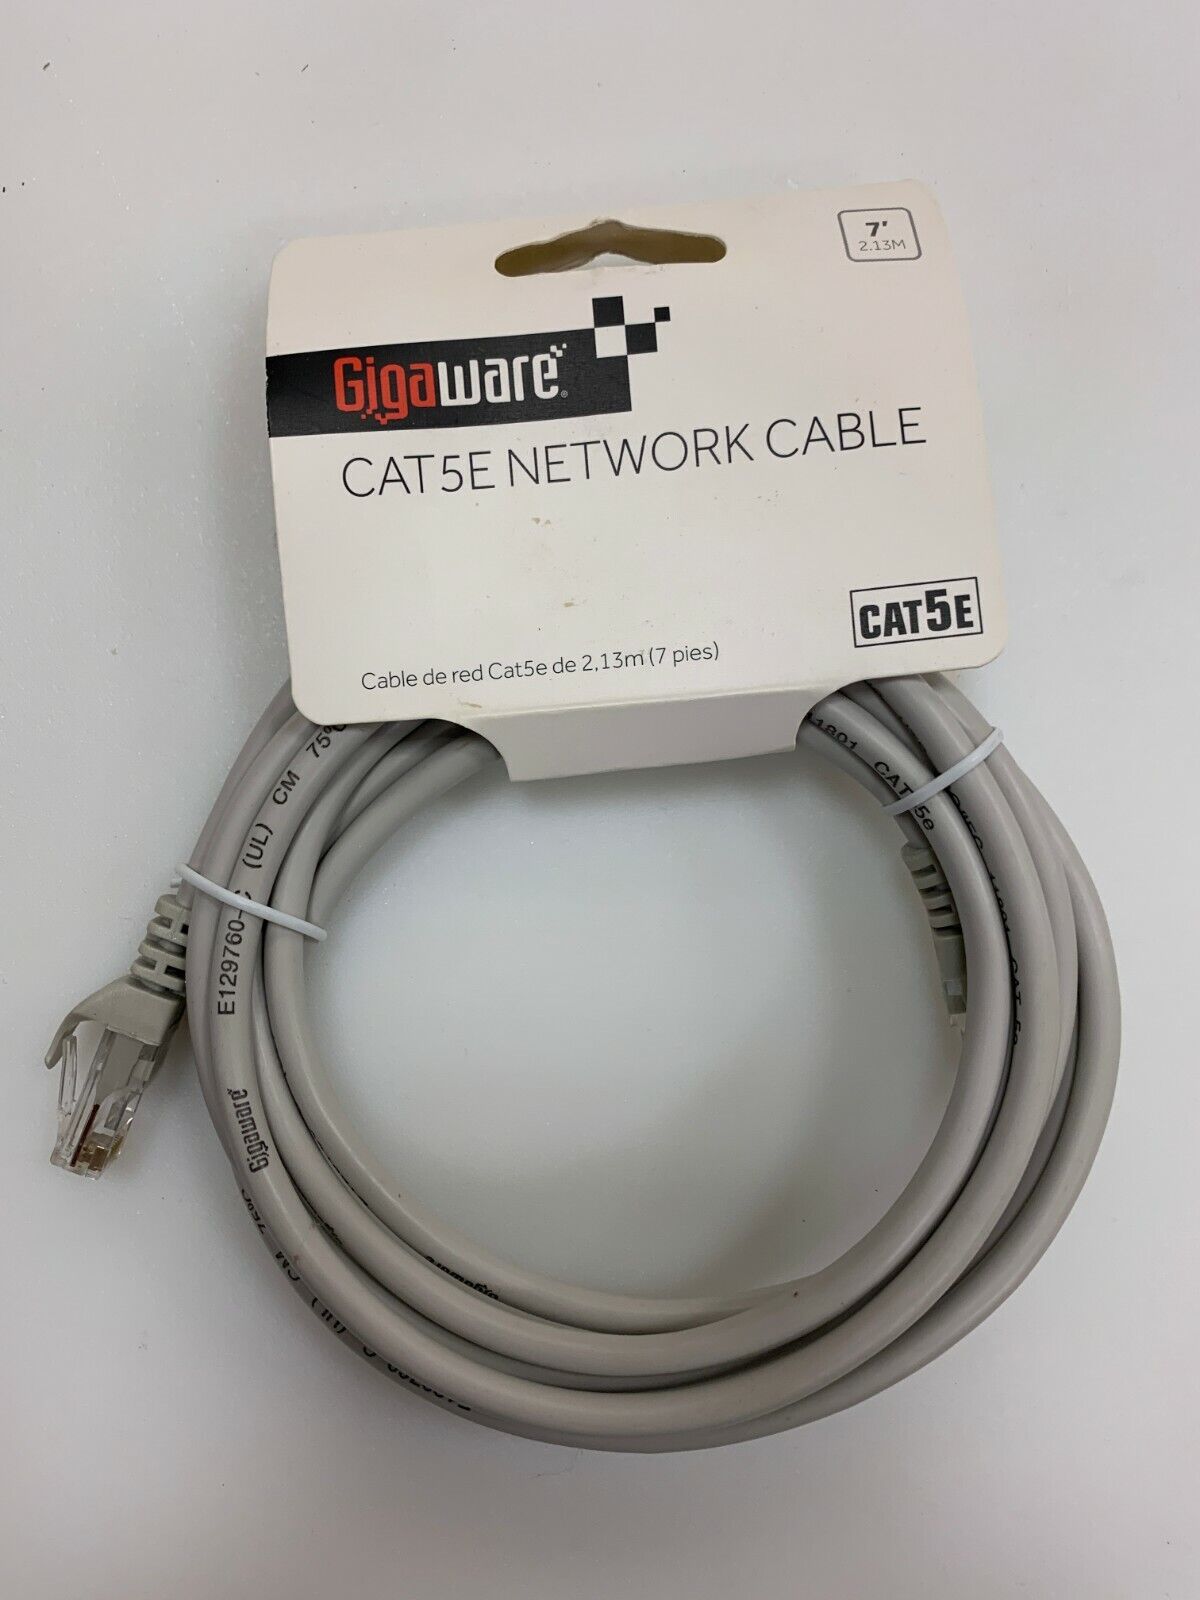 Gigaware 3-Foot RJ45 Cat 5e Cat5e Network Cable 7Ft Gray - LOT OF 3 Gold-Plated